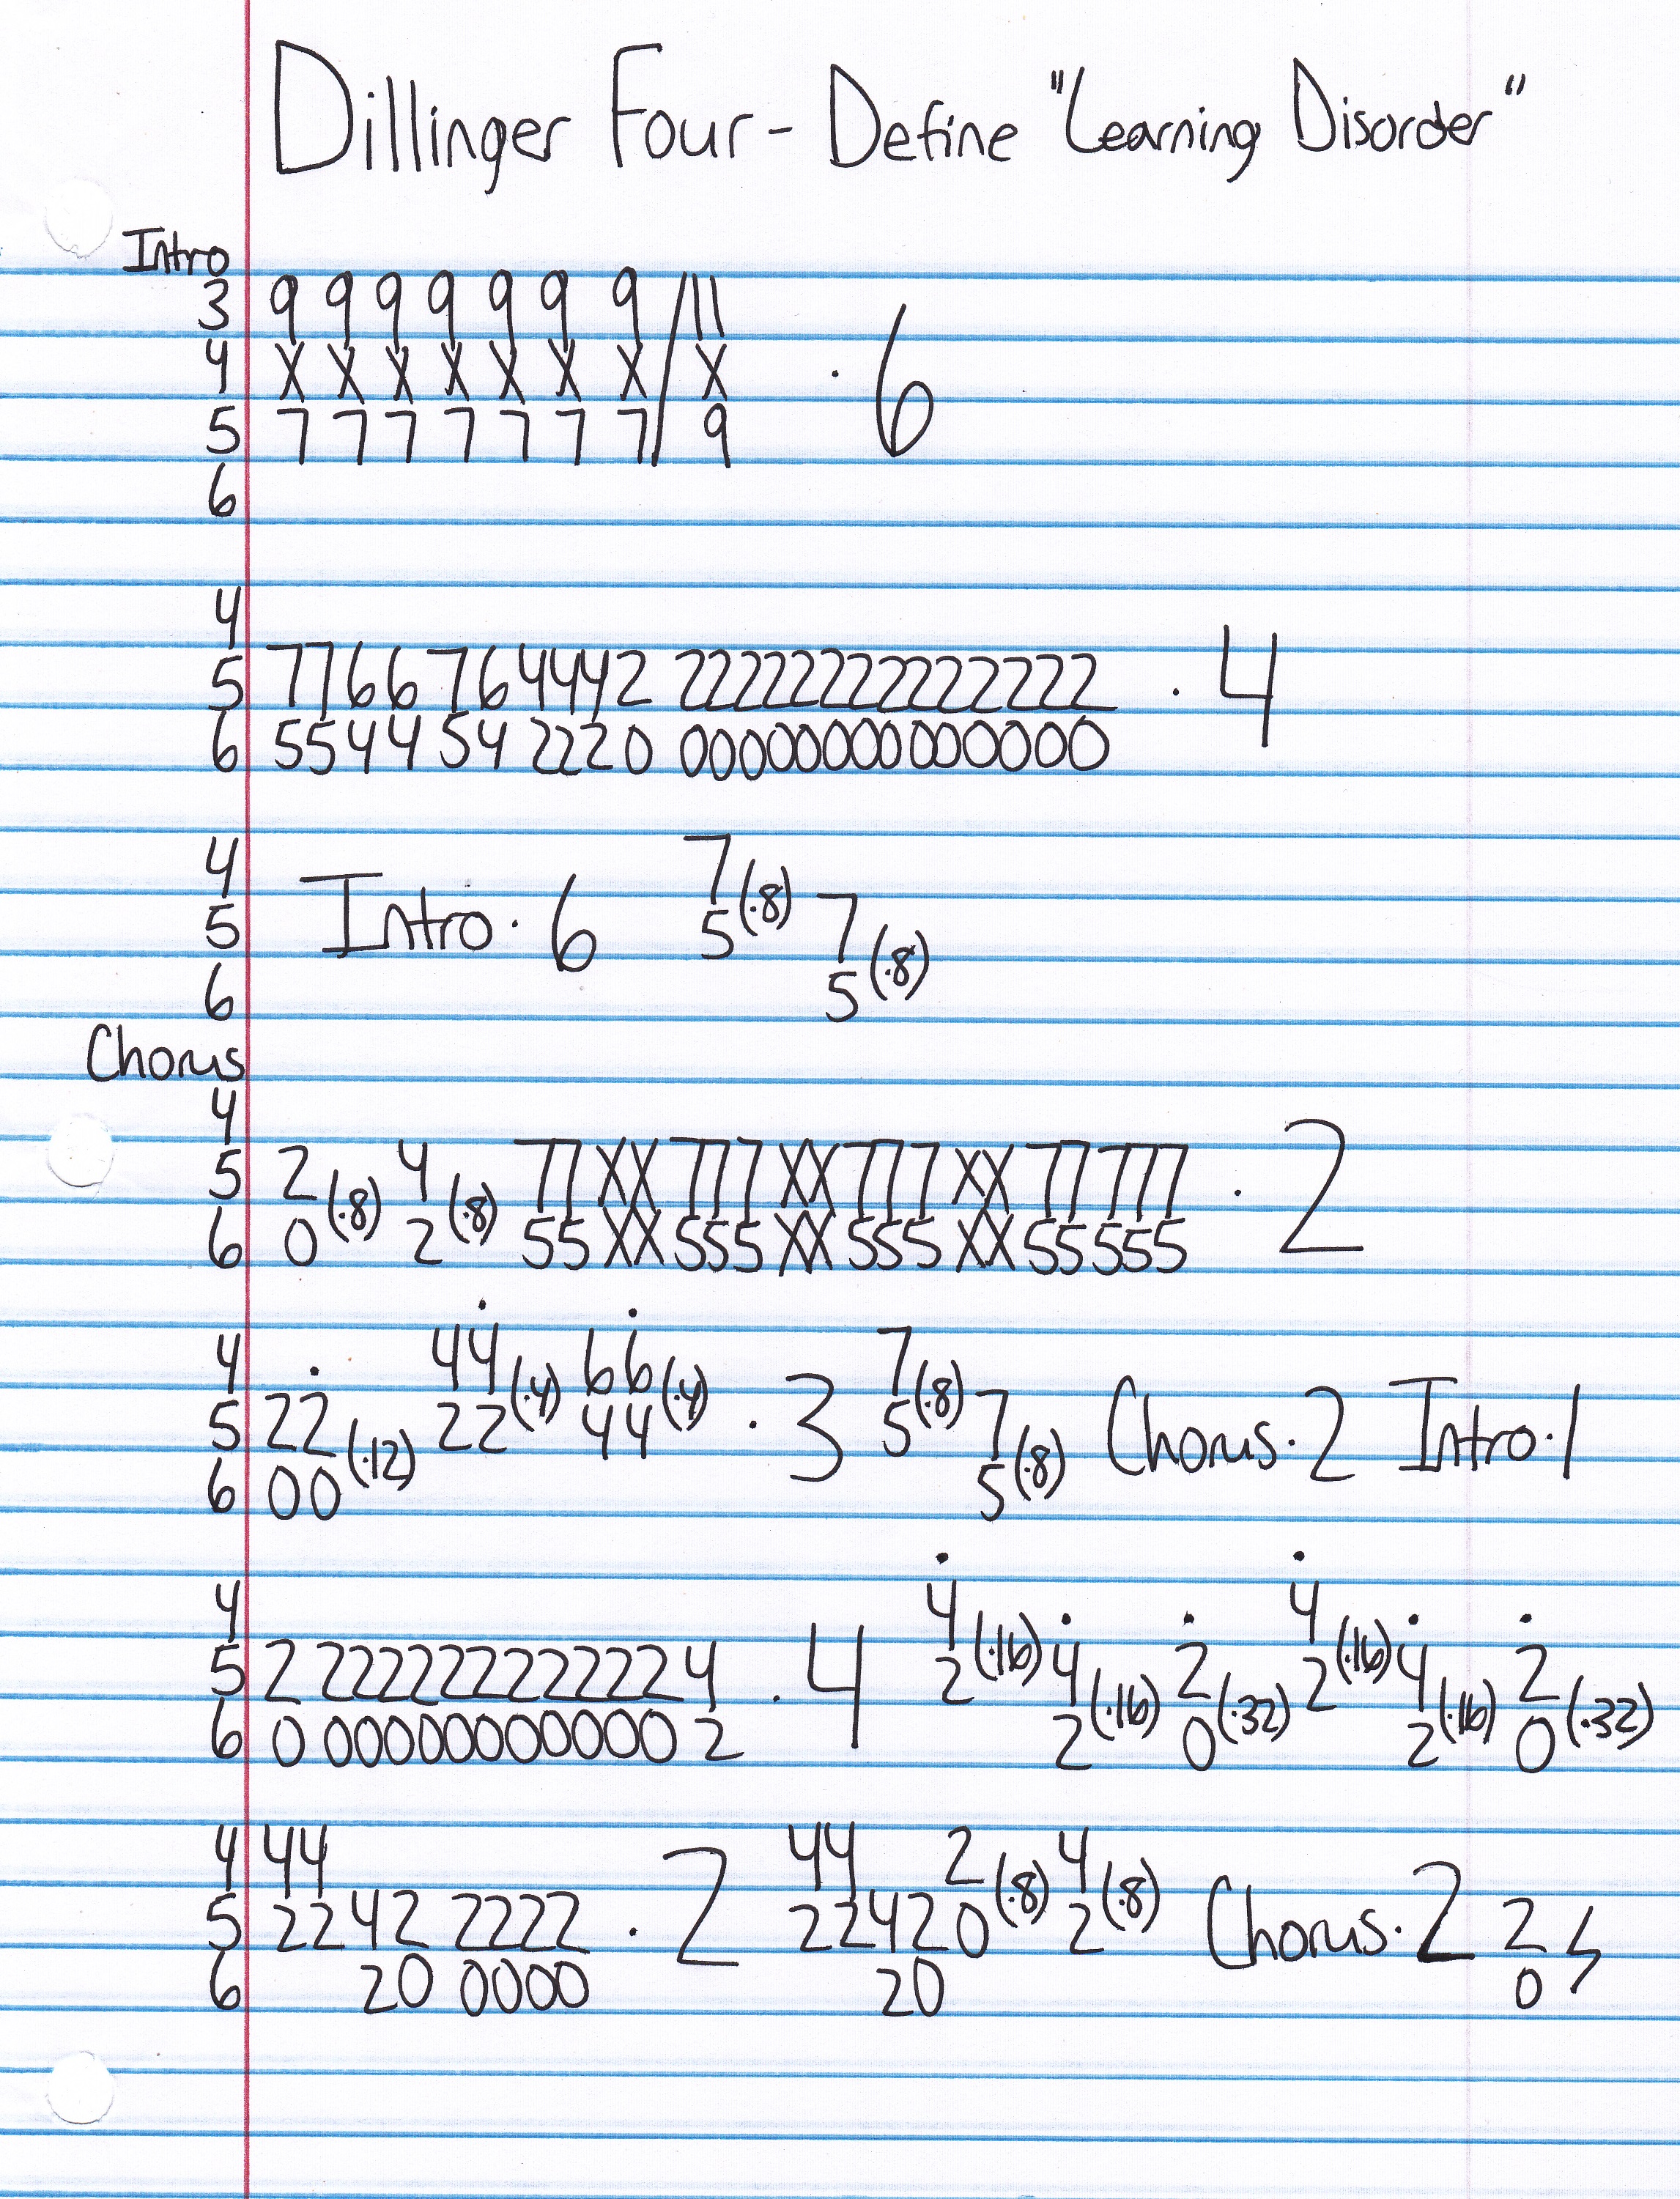 High quality guitar tab for Define Learning Disorder by Dillinger Four off of the album Versus God. ***Complete and accurate guitar tab!***